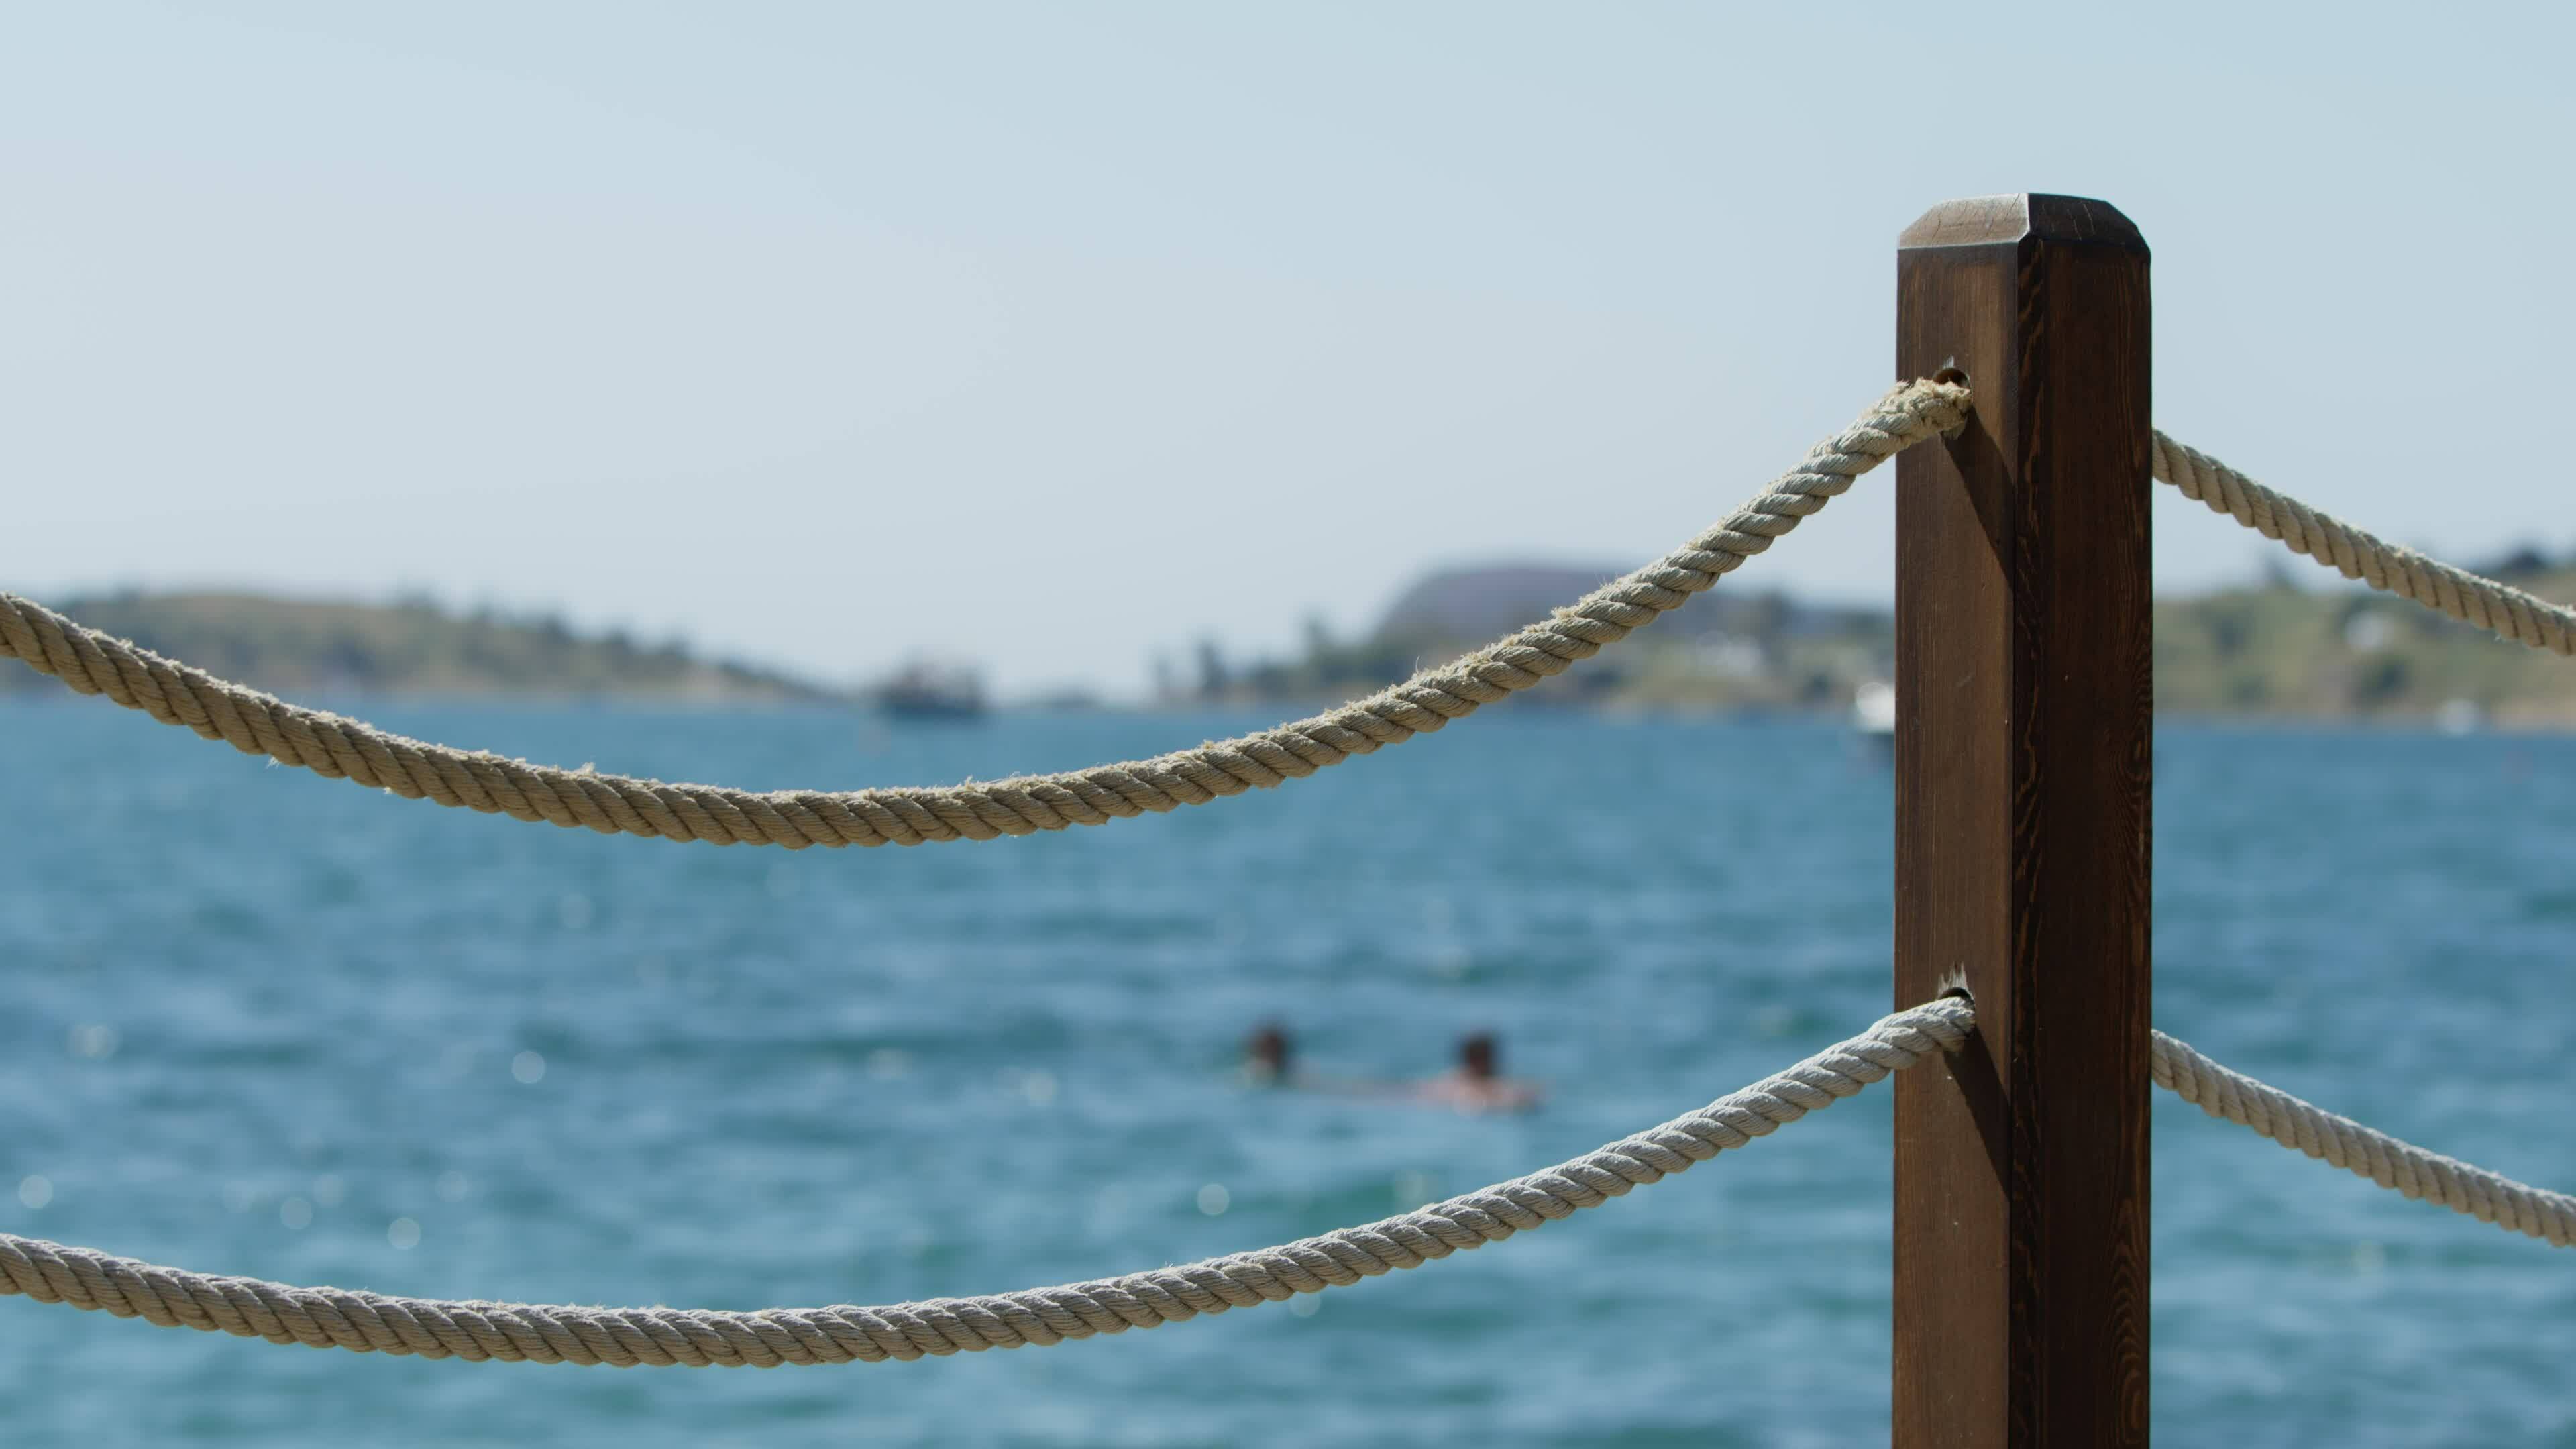 https://static.vecteezy.com/system/resources/thumbnails/024/852/010/original/fence-made-of-rope-and-wood-near-the-sea-free-video.jpg